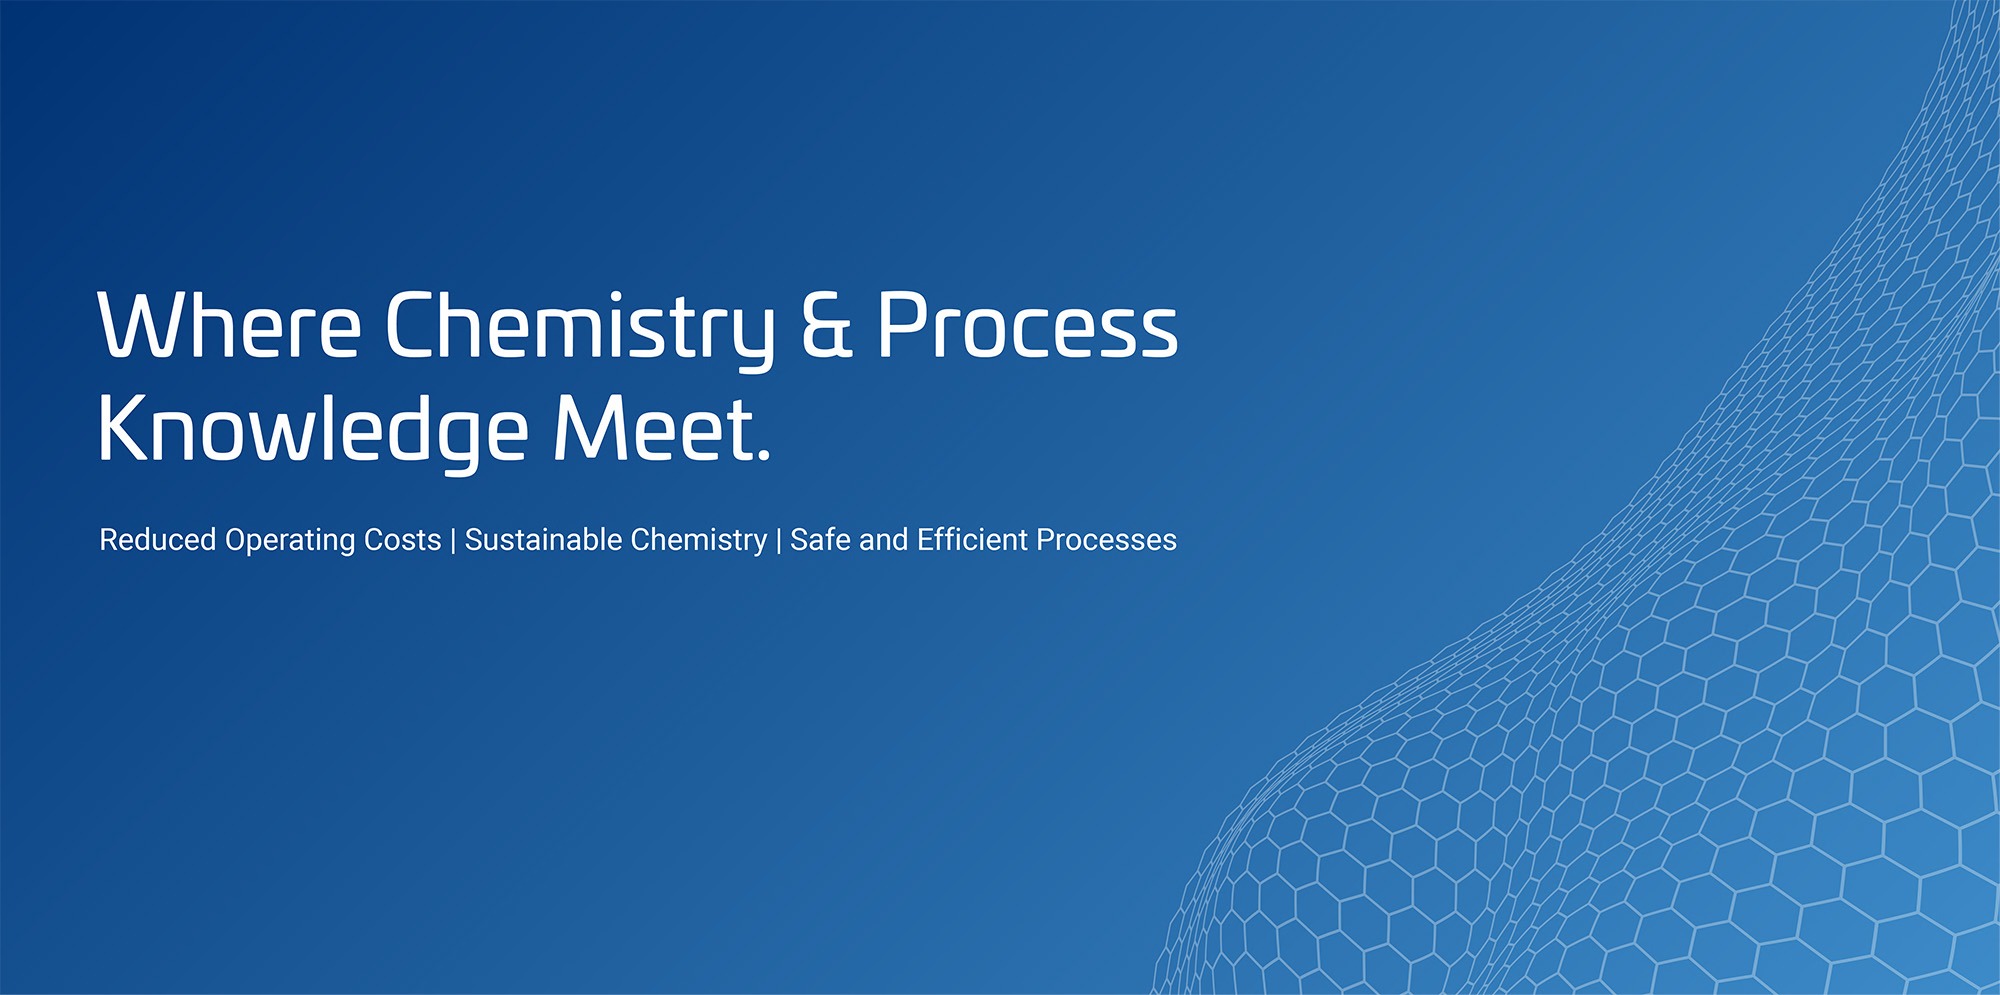 Where Chemistry and Process Knowledge Meet. Reduced Operating Costs, Sustainable Chemistry, Safe and Efficient Processes